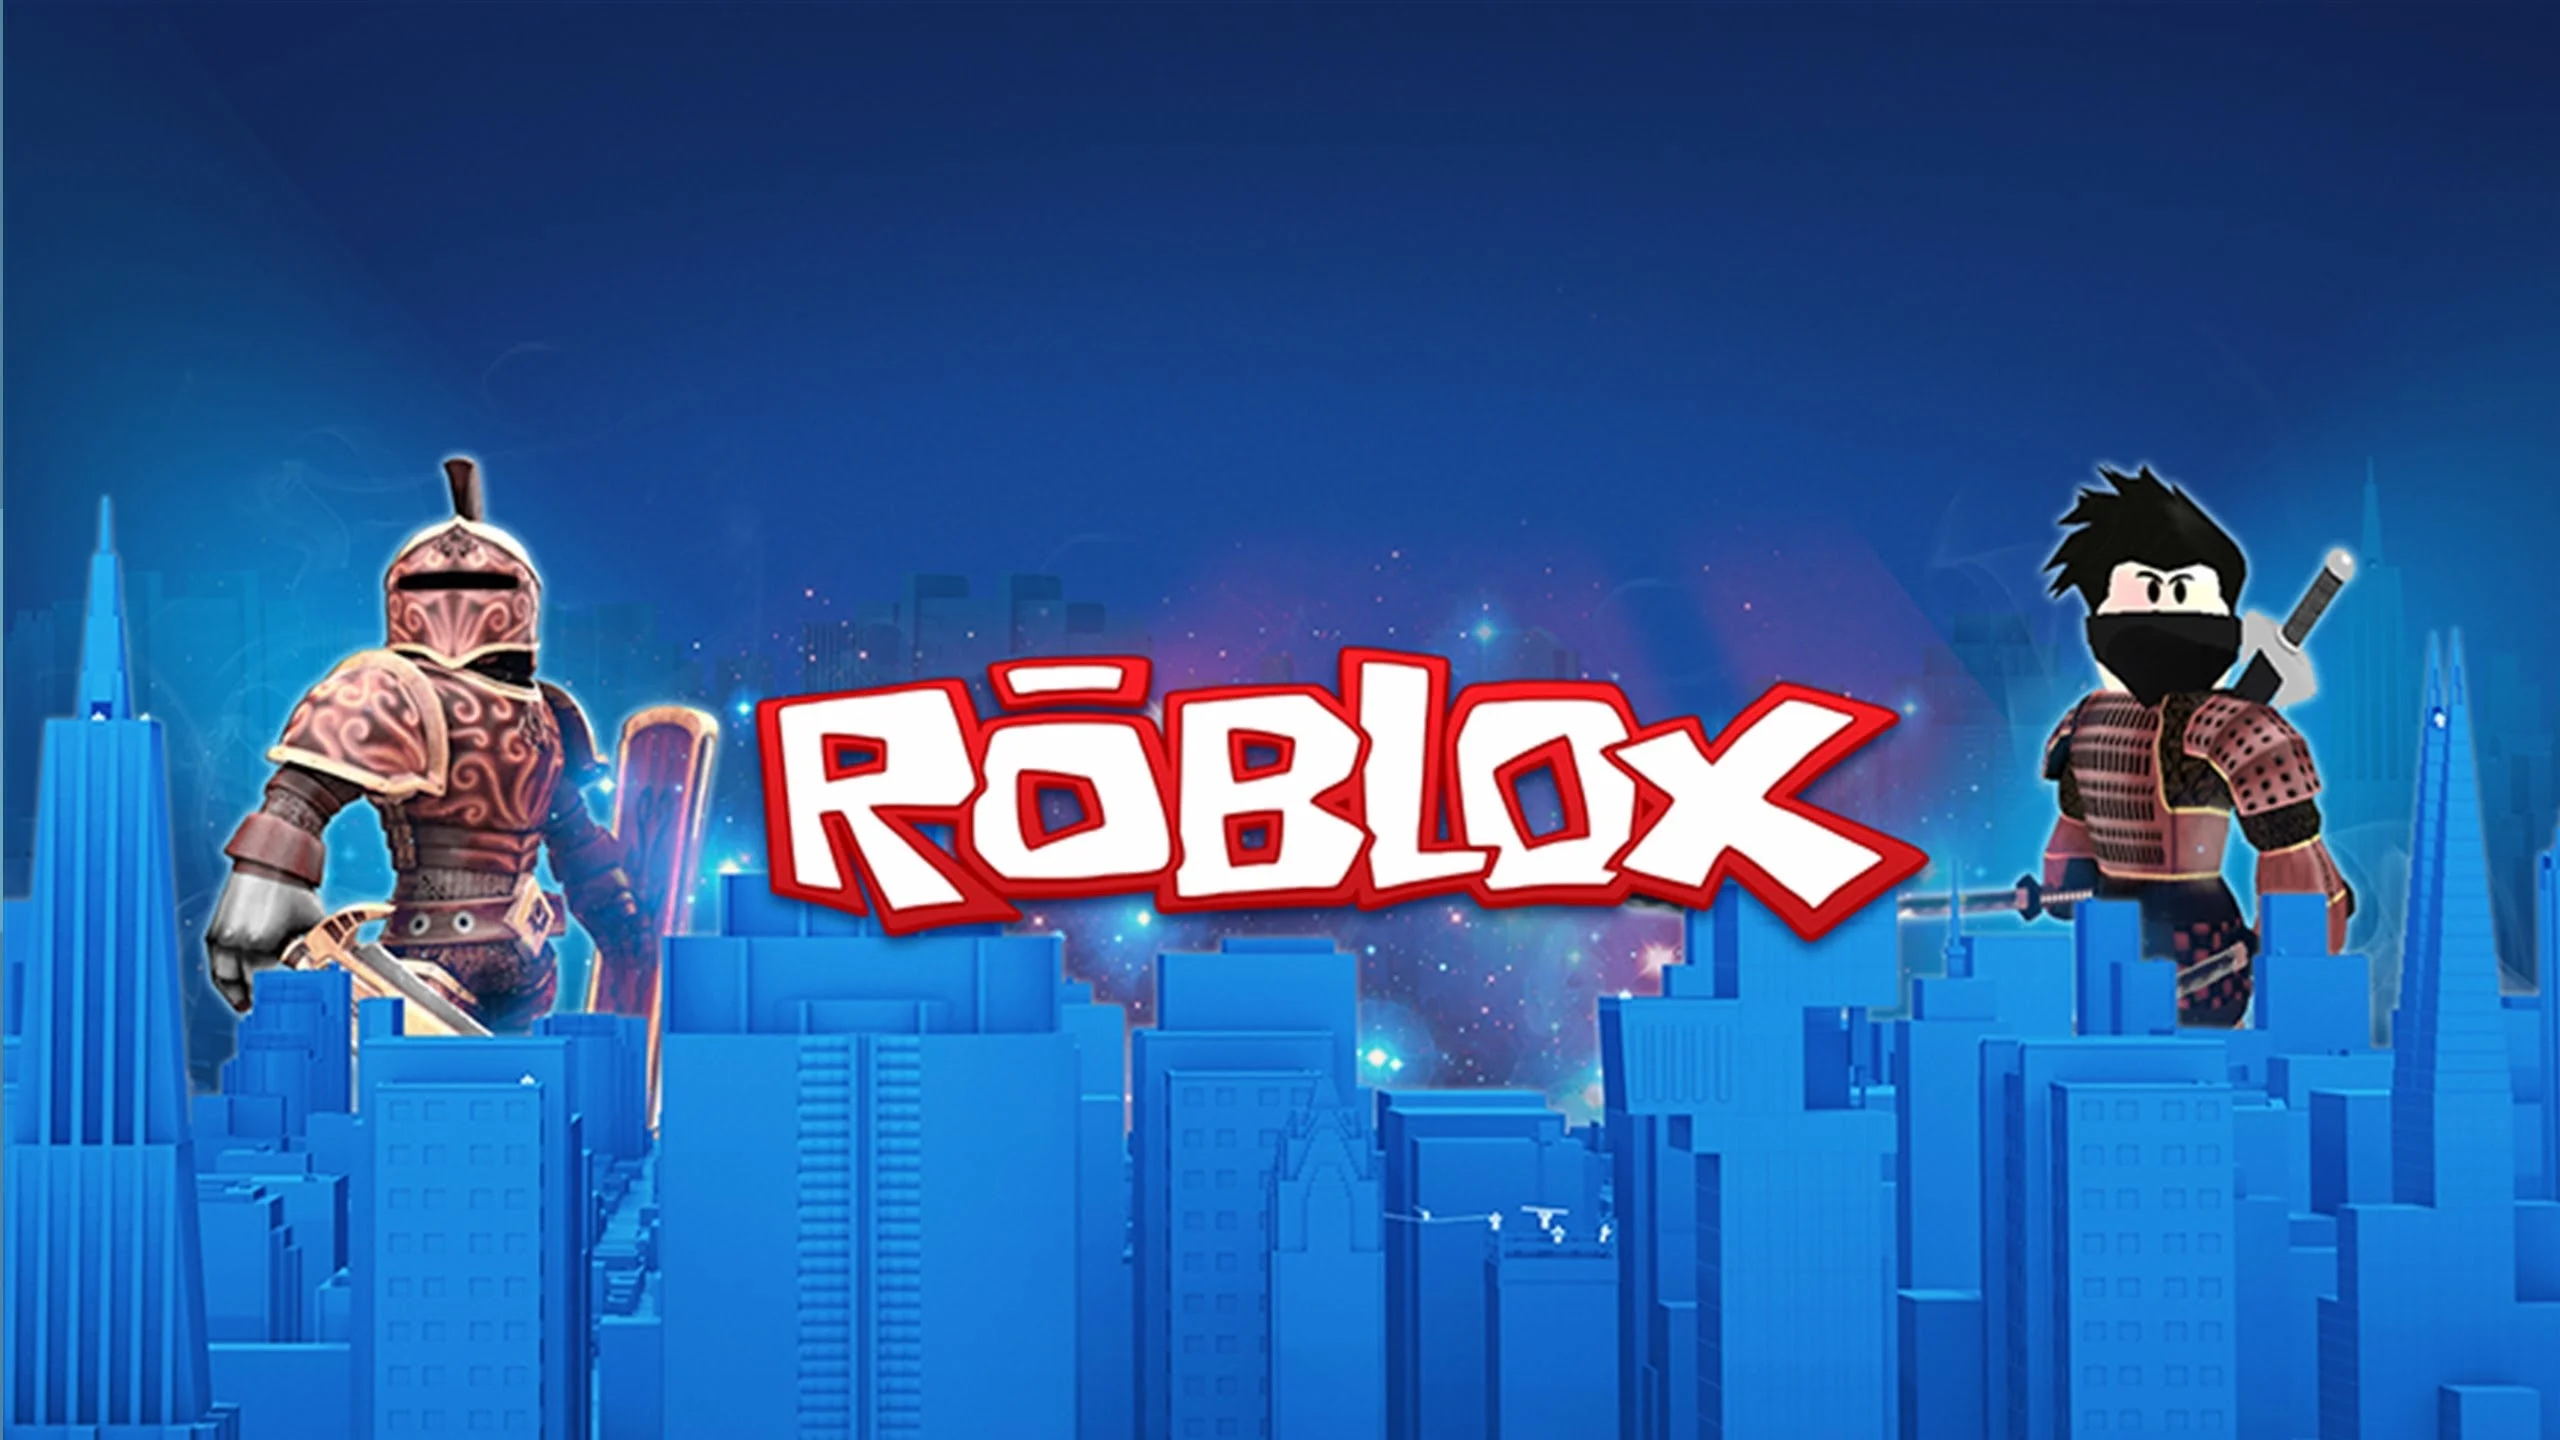 Roblox Error Code 279 — Learn All Working Fixes